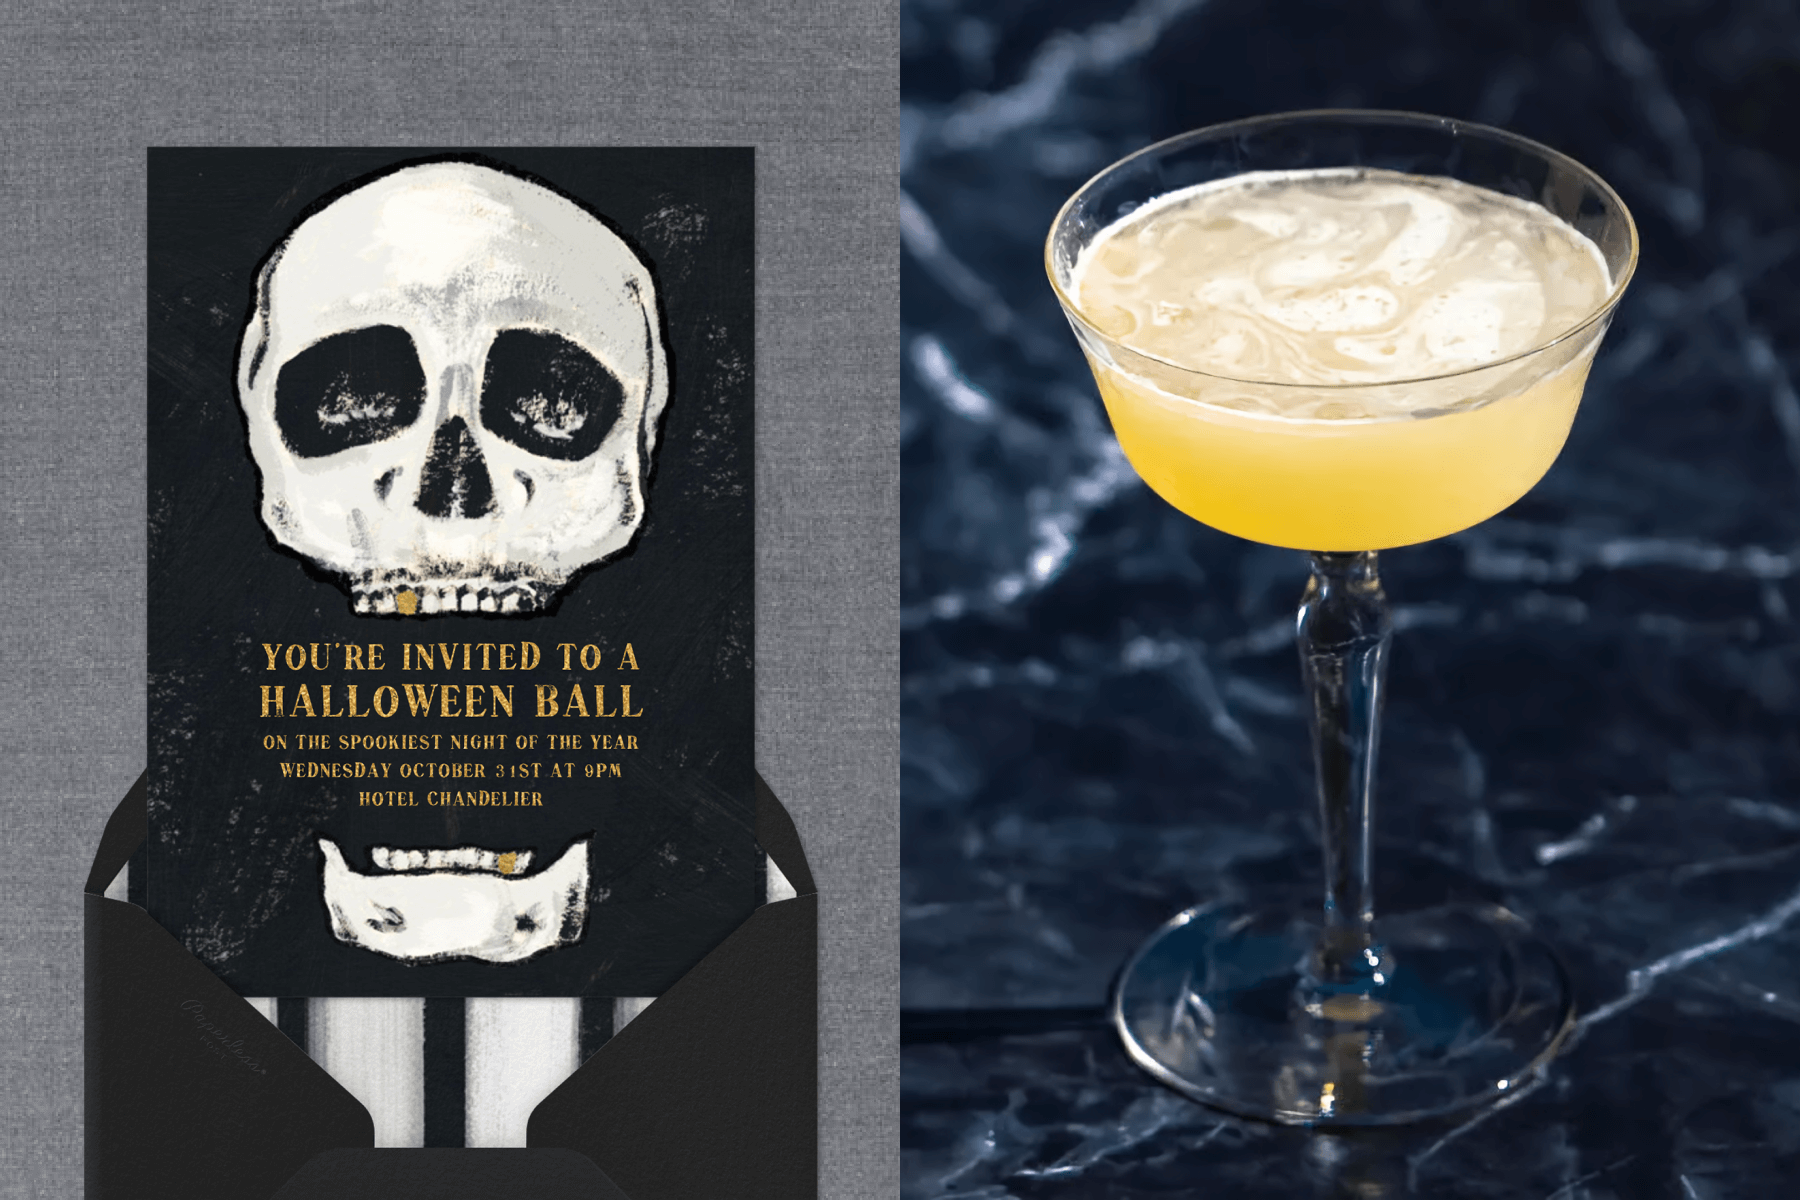 Left: A black Halloween invitation featuring an illustration of a skull. The wording is coming out of the mouth; Right: A corpse reviver cocktail in an elegant glass.